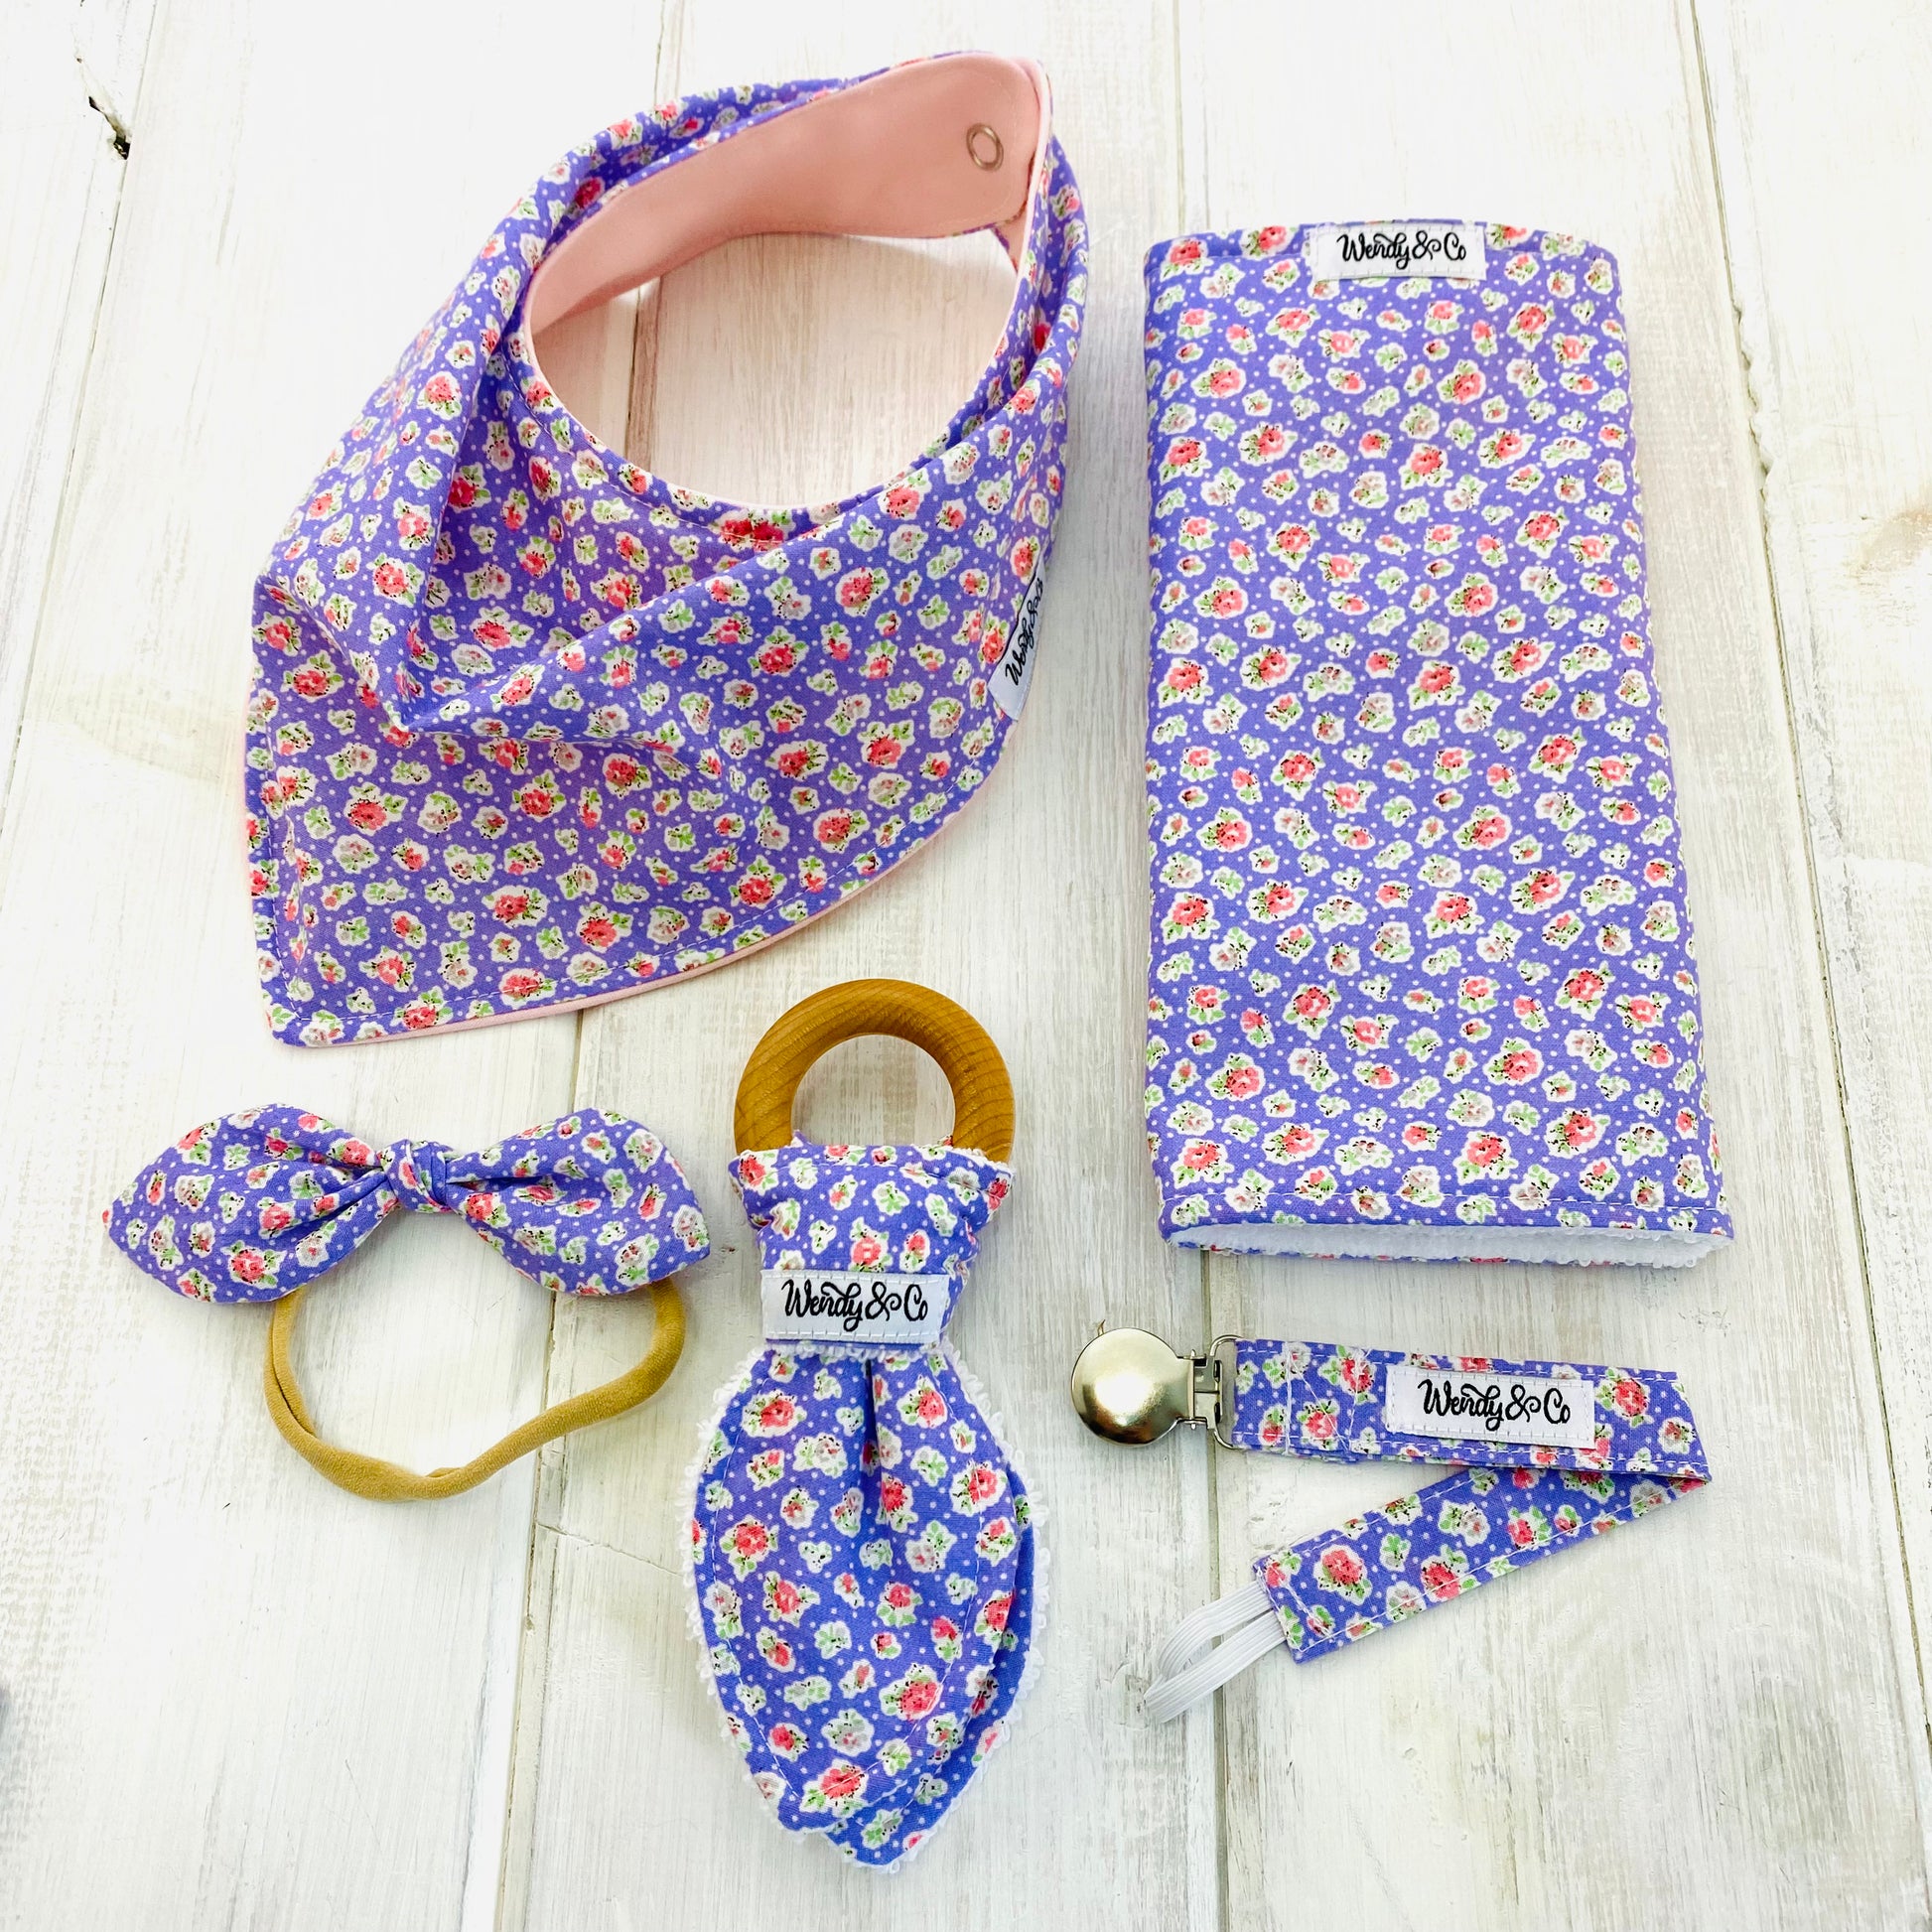 Baby shower gift set with bib, burp cloth, teether, paci clip and bow in a pastel lilac print.